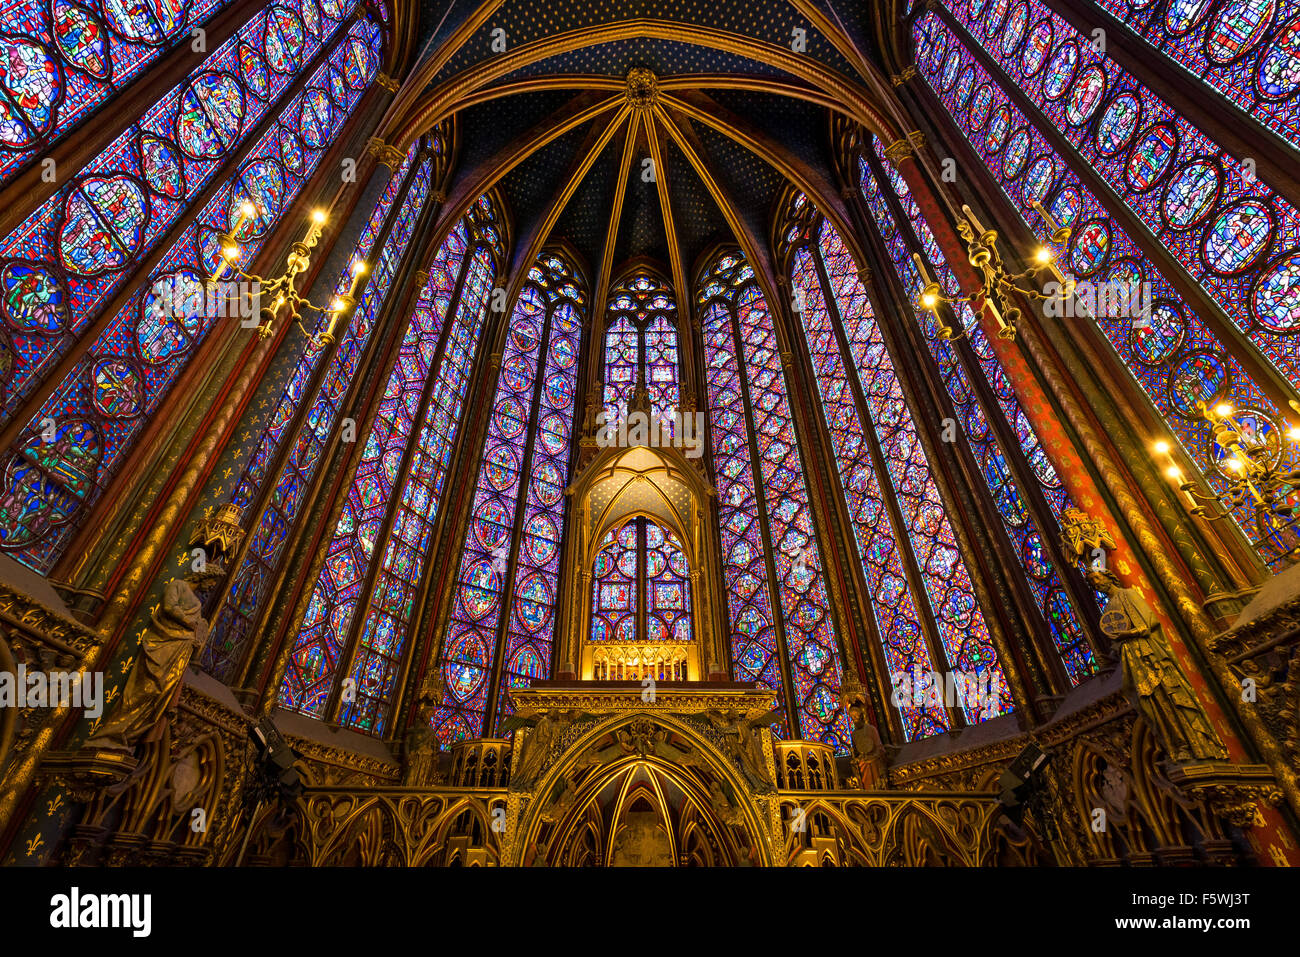 Stained Glass In The Sainte Chapelle Holy Chapel Interior